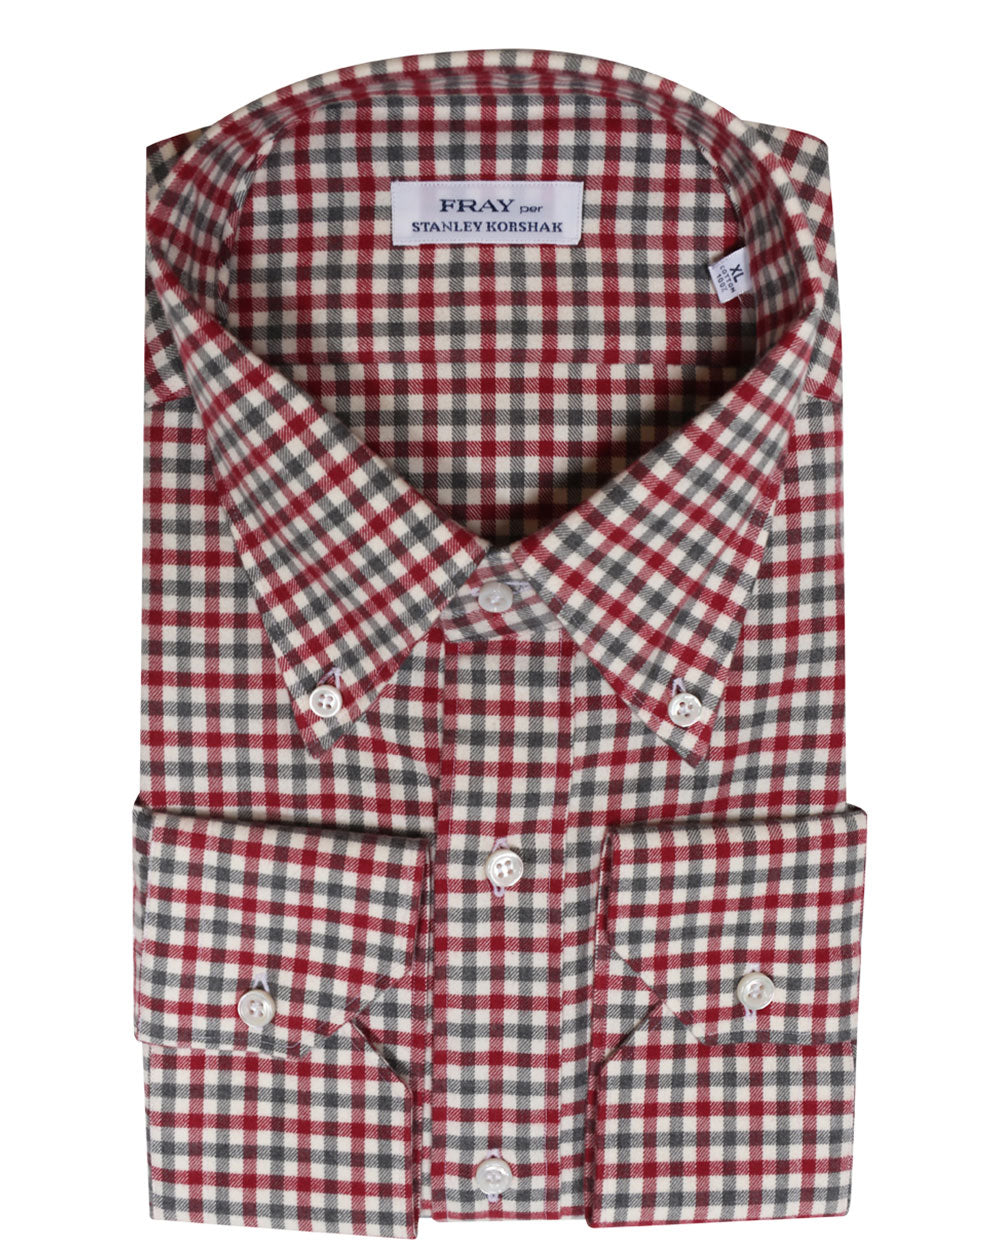 Off White and Red Cotton Checked Dress Shirt